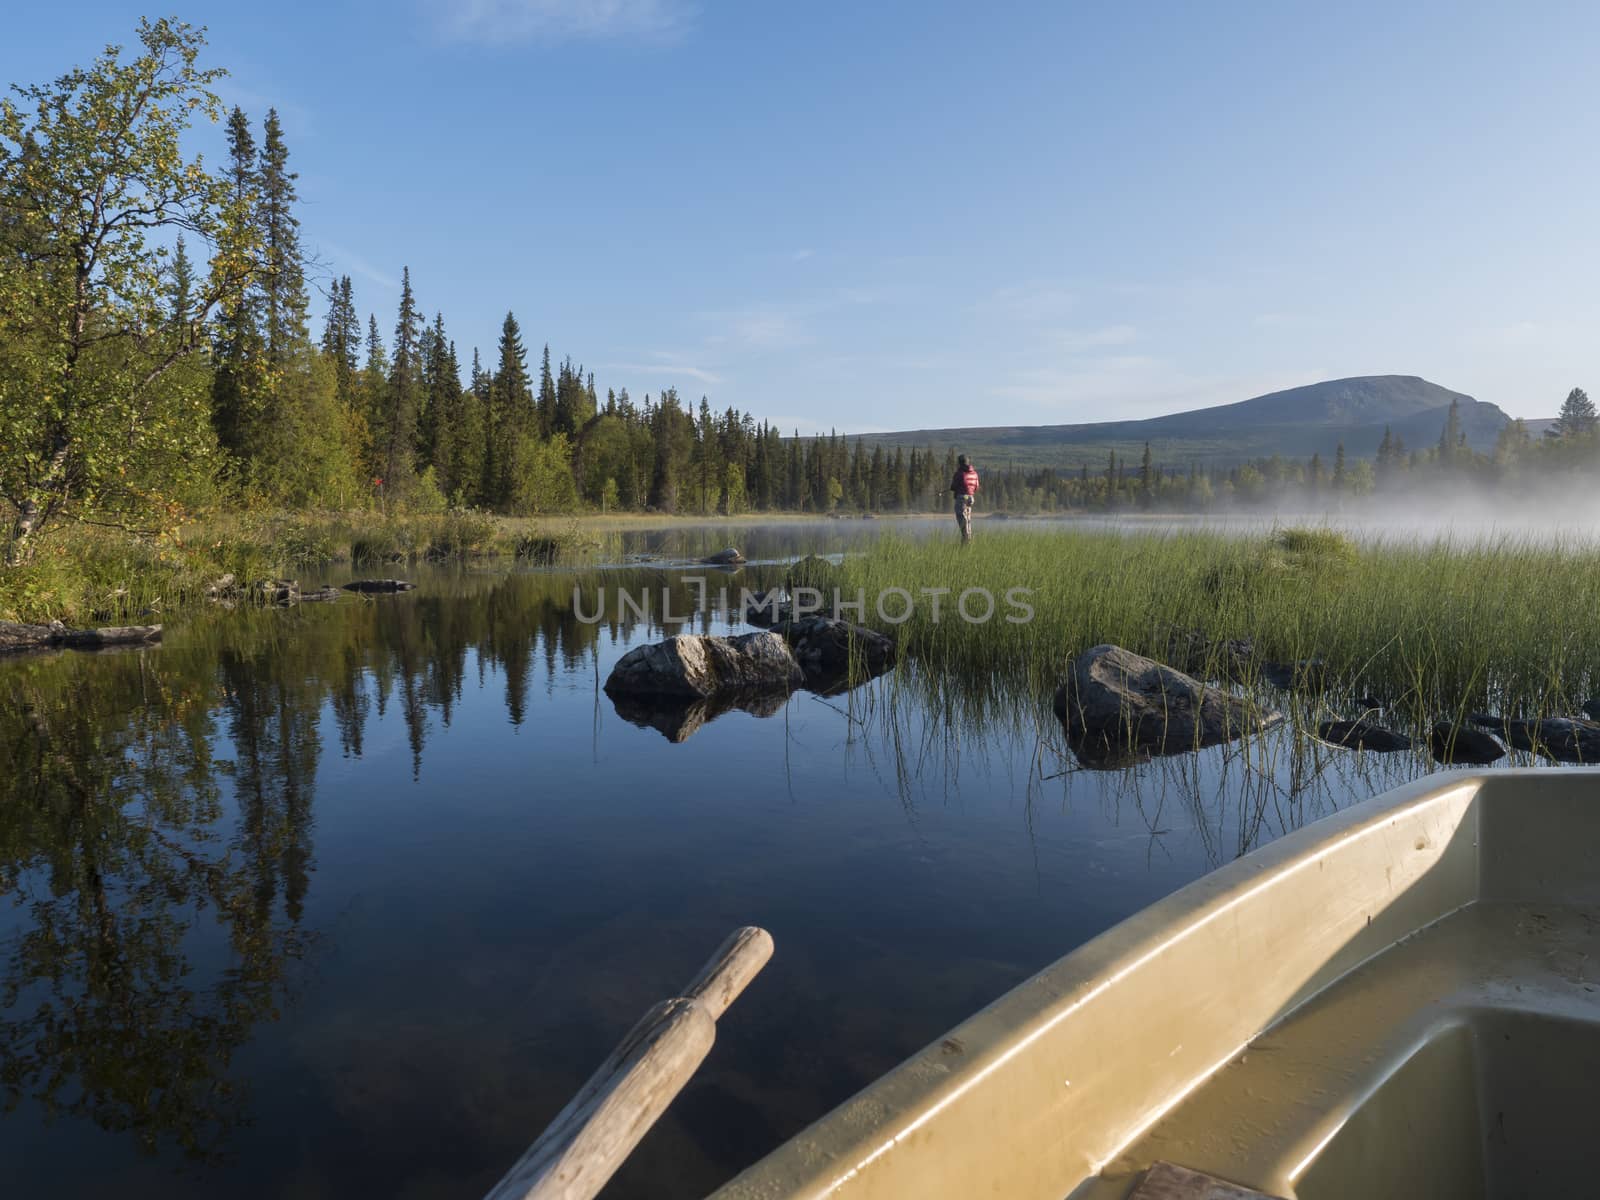 View from rowing boat on Fisherman man at lake Sjabatjakjaure in Beautiful sunny morning haze mist in Sweden Lapland nature. Mountains, birch trees, spruce forest. Blu sky background.